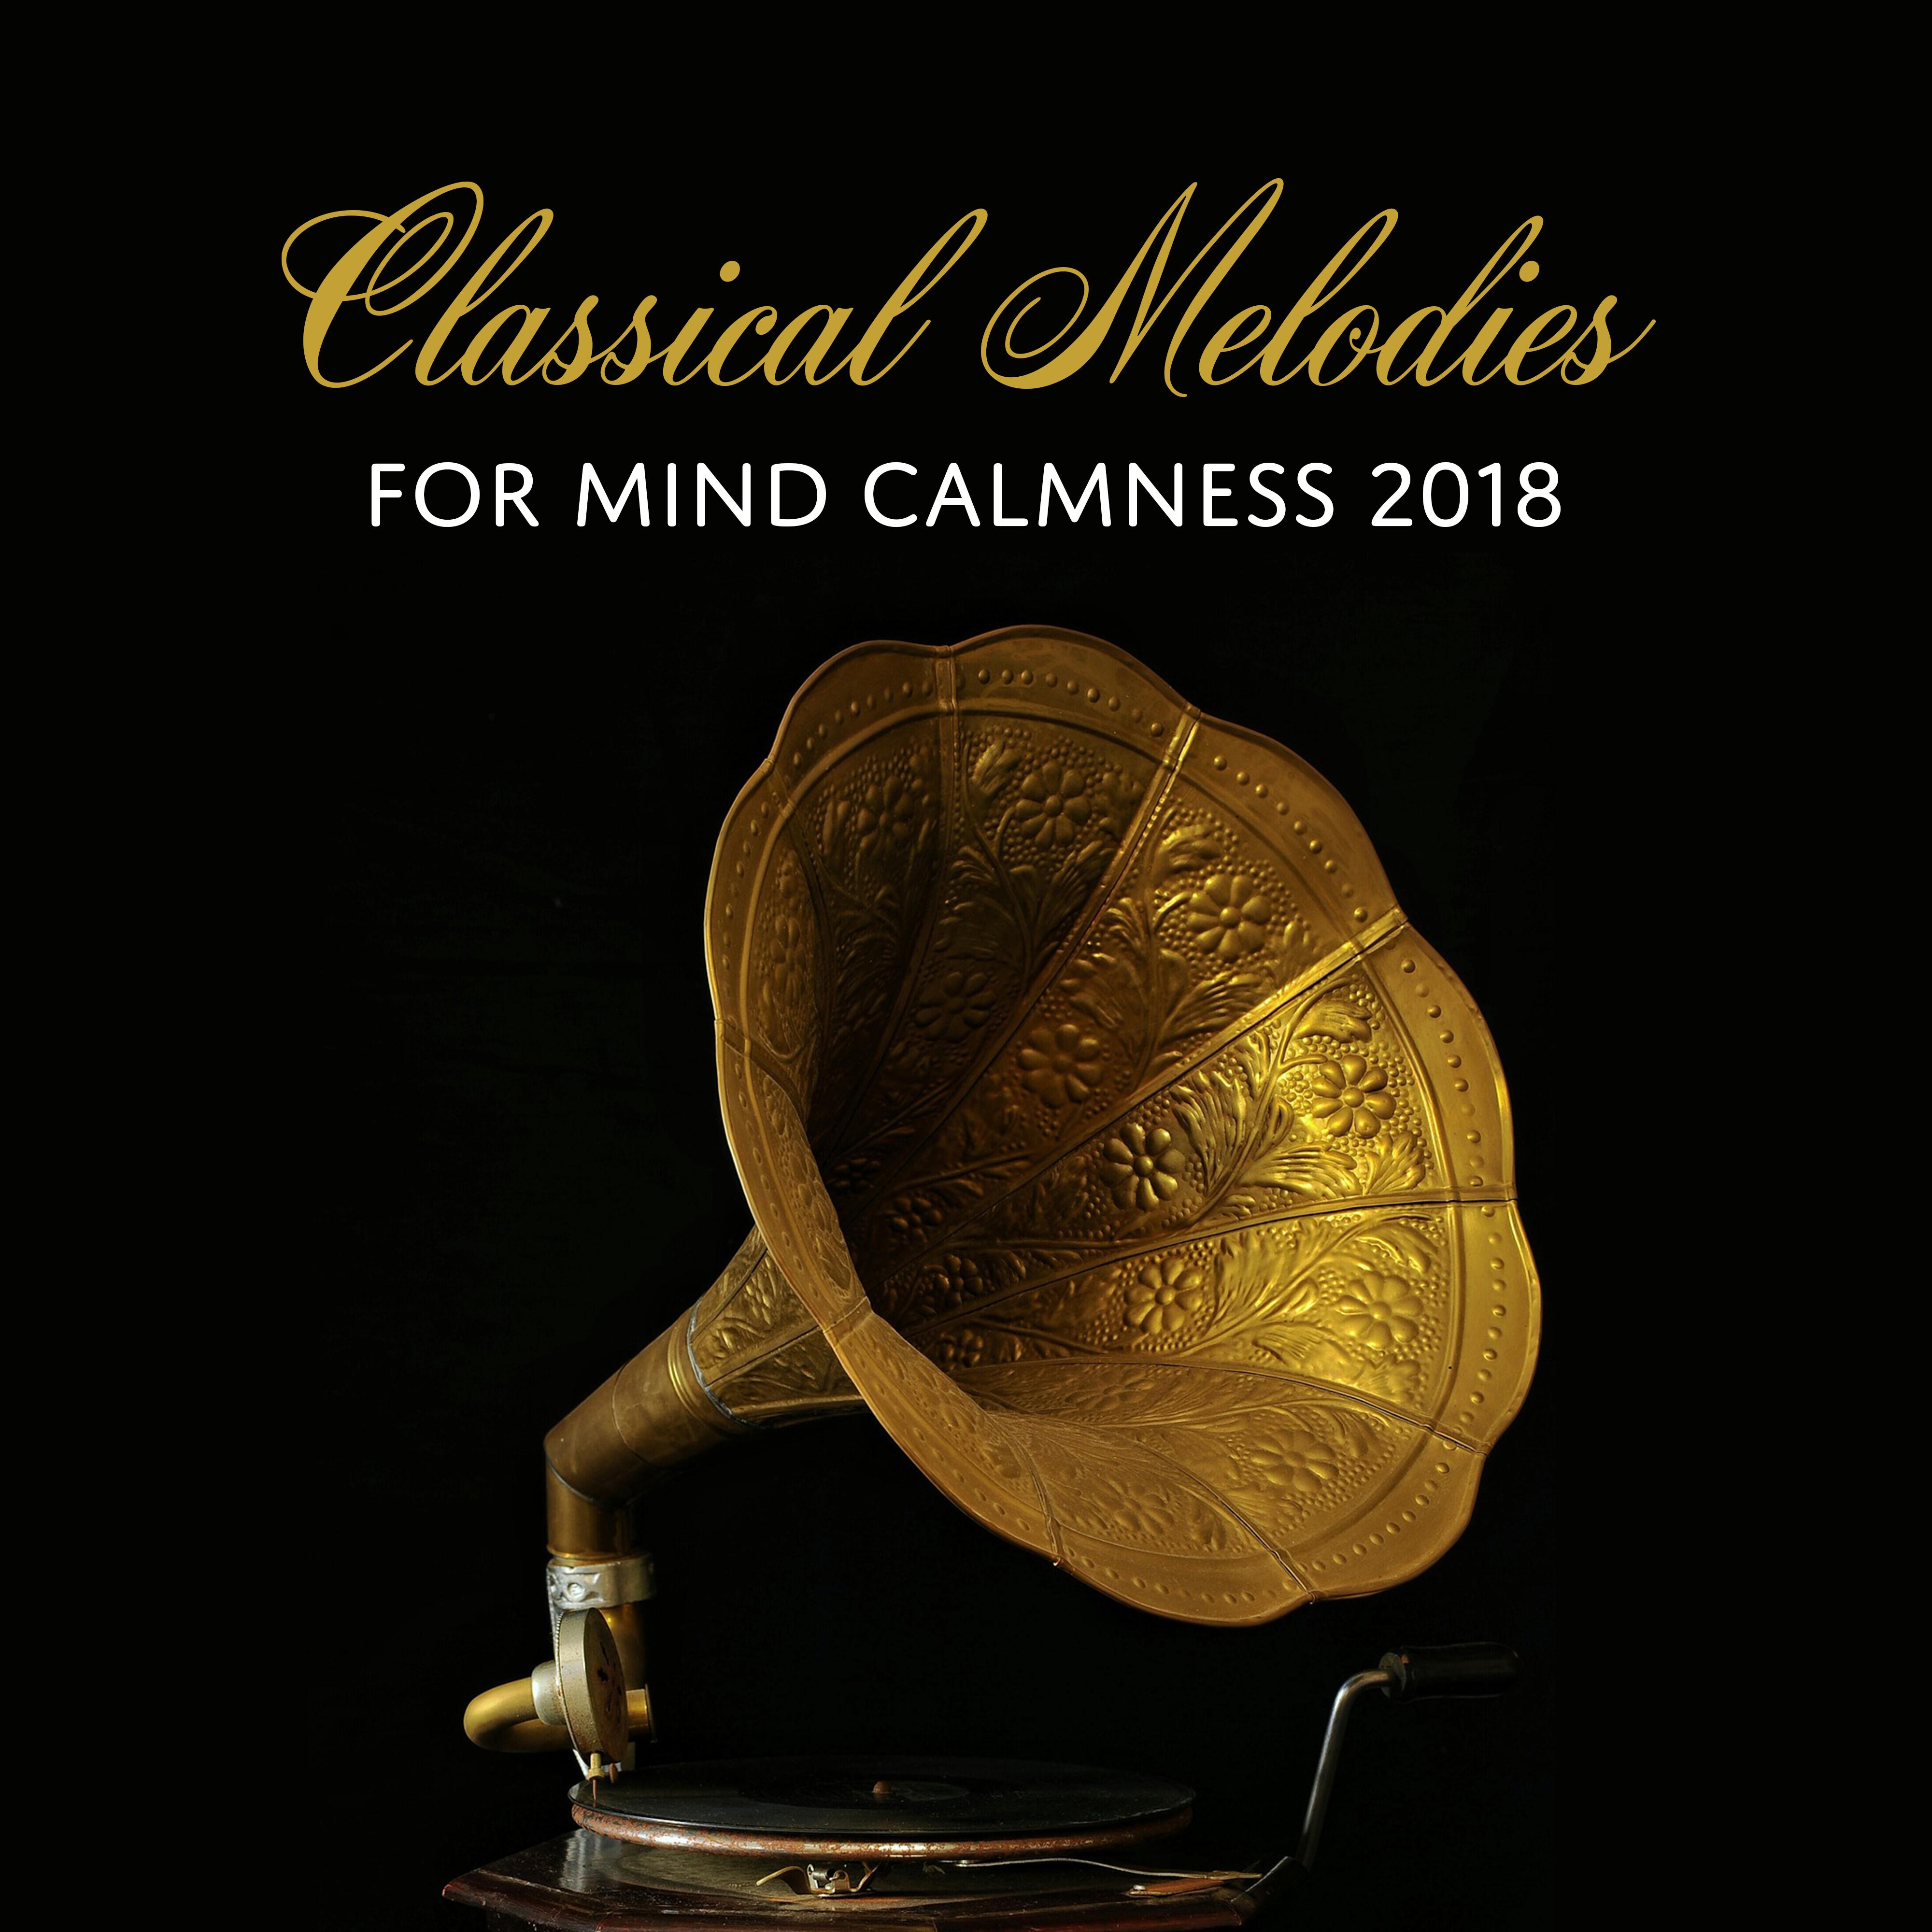 Classical Melodies for Mind Calmness 2018